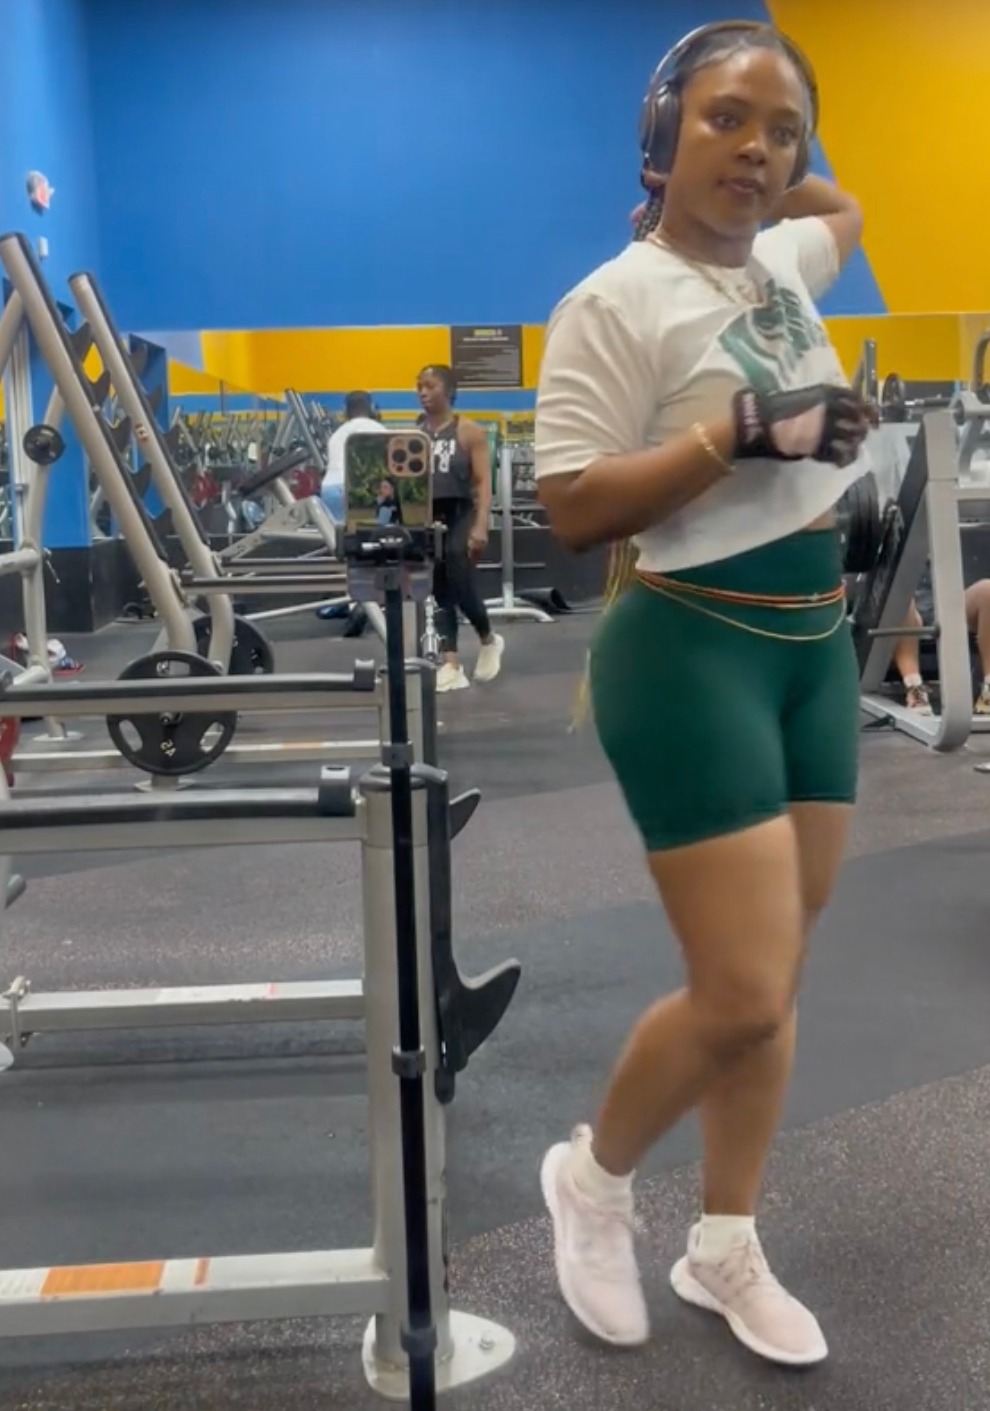 My mom gave me dimples in my butt cheeks but not my face – I still wear shorts to the gym with cellulite, I’m hot